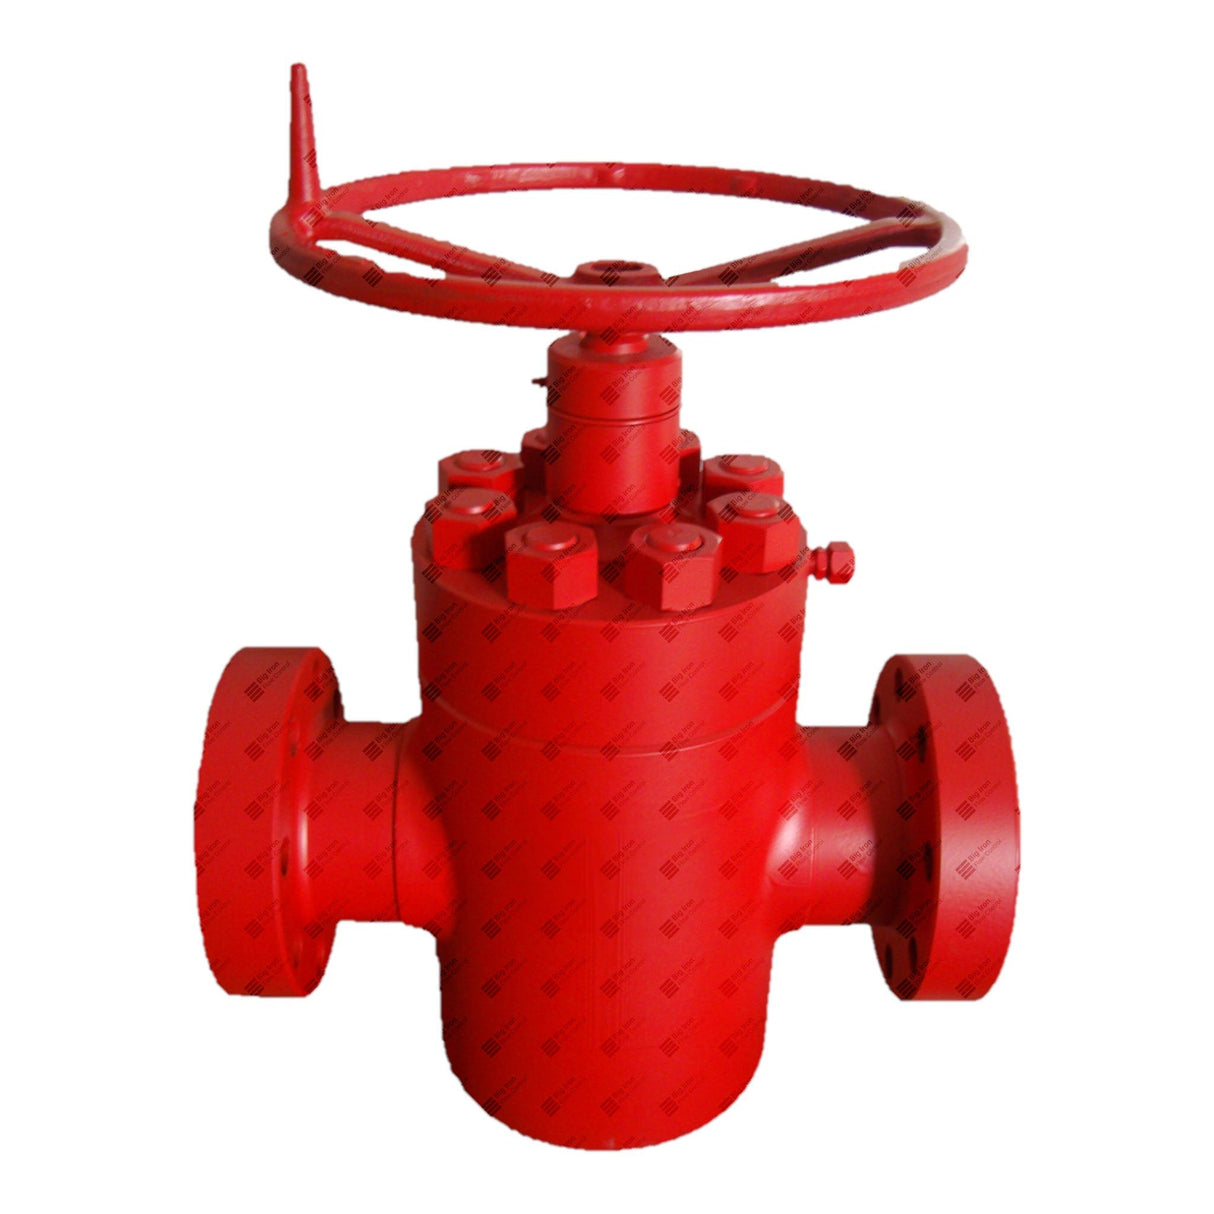 Gate Valve, Manual, Slab, 3-1/16" 10M, HH,  L+U, PSL 3G, PR 2, API 6A, Inconel 625 Cladded